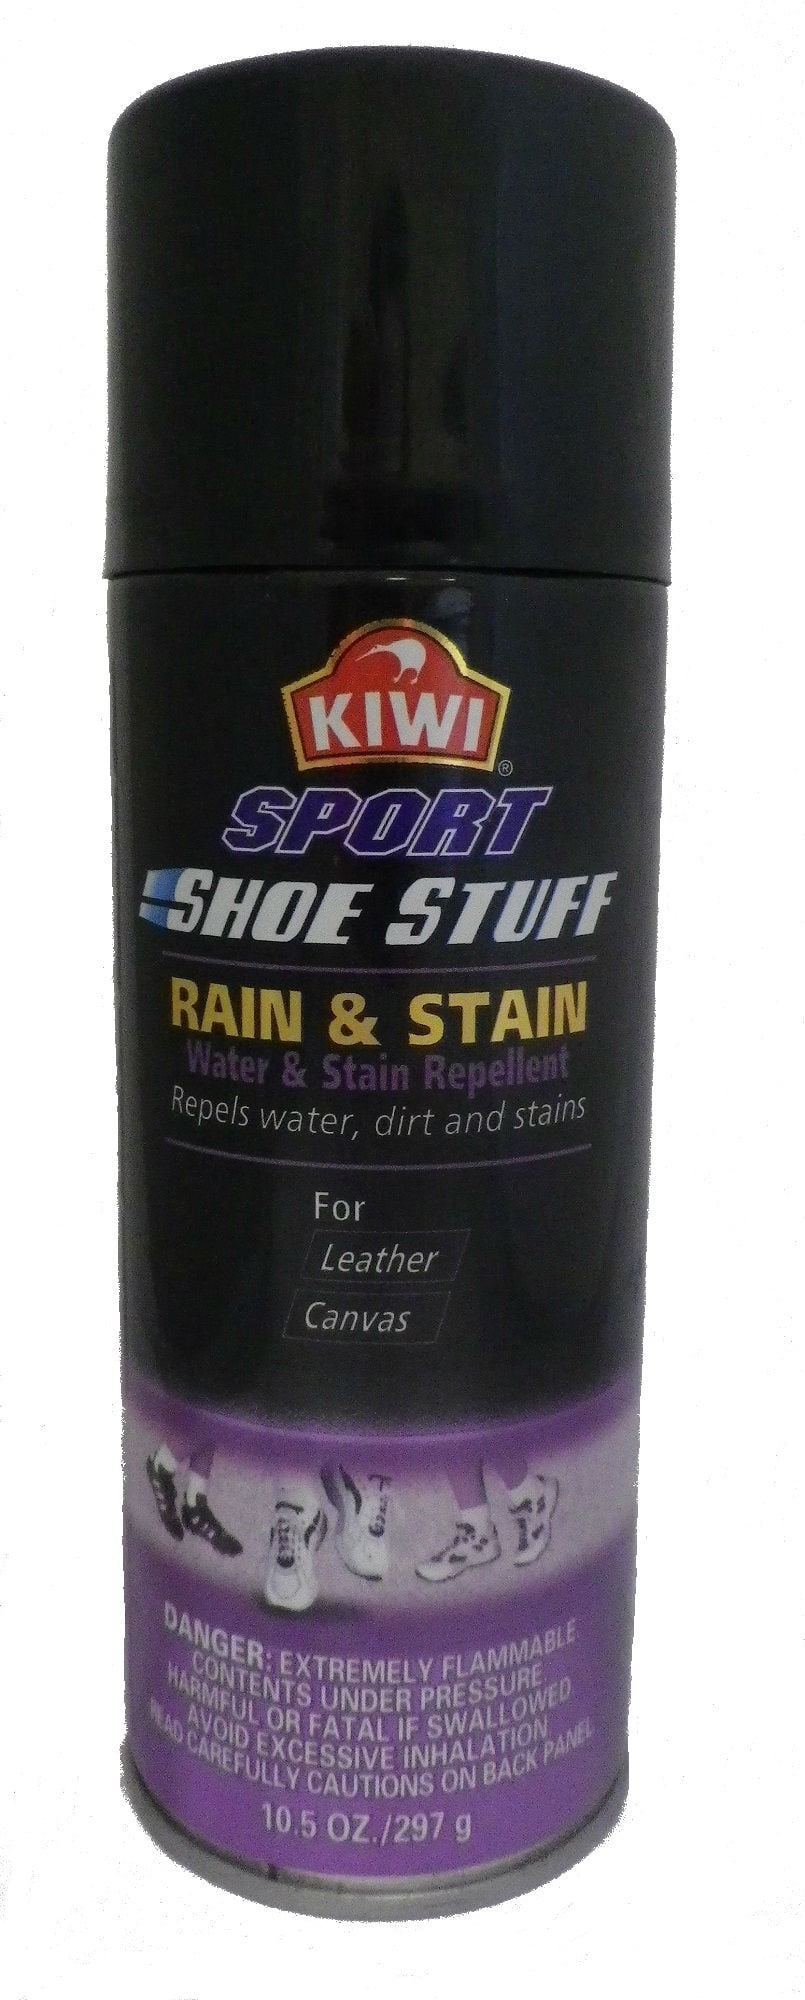 rain and stain repellent for shoes